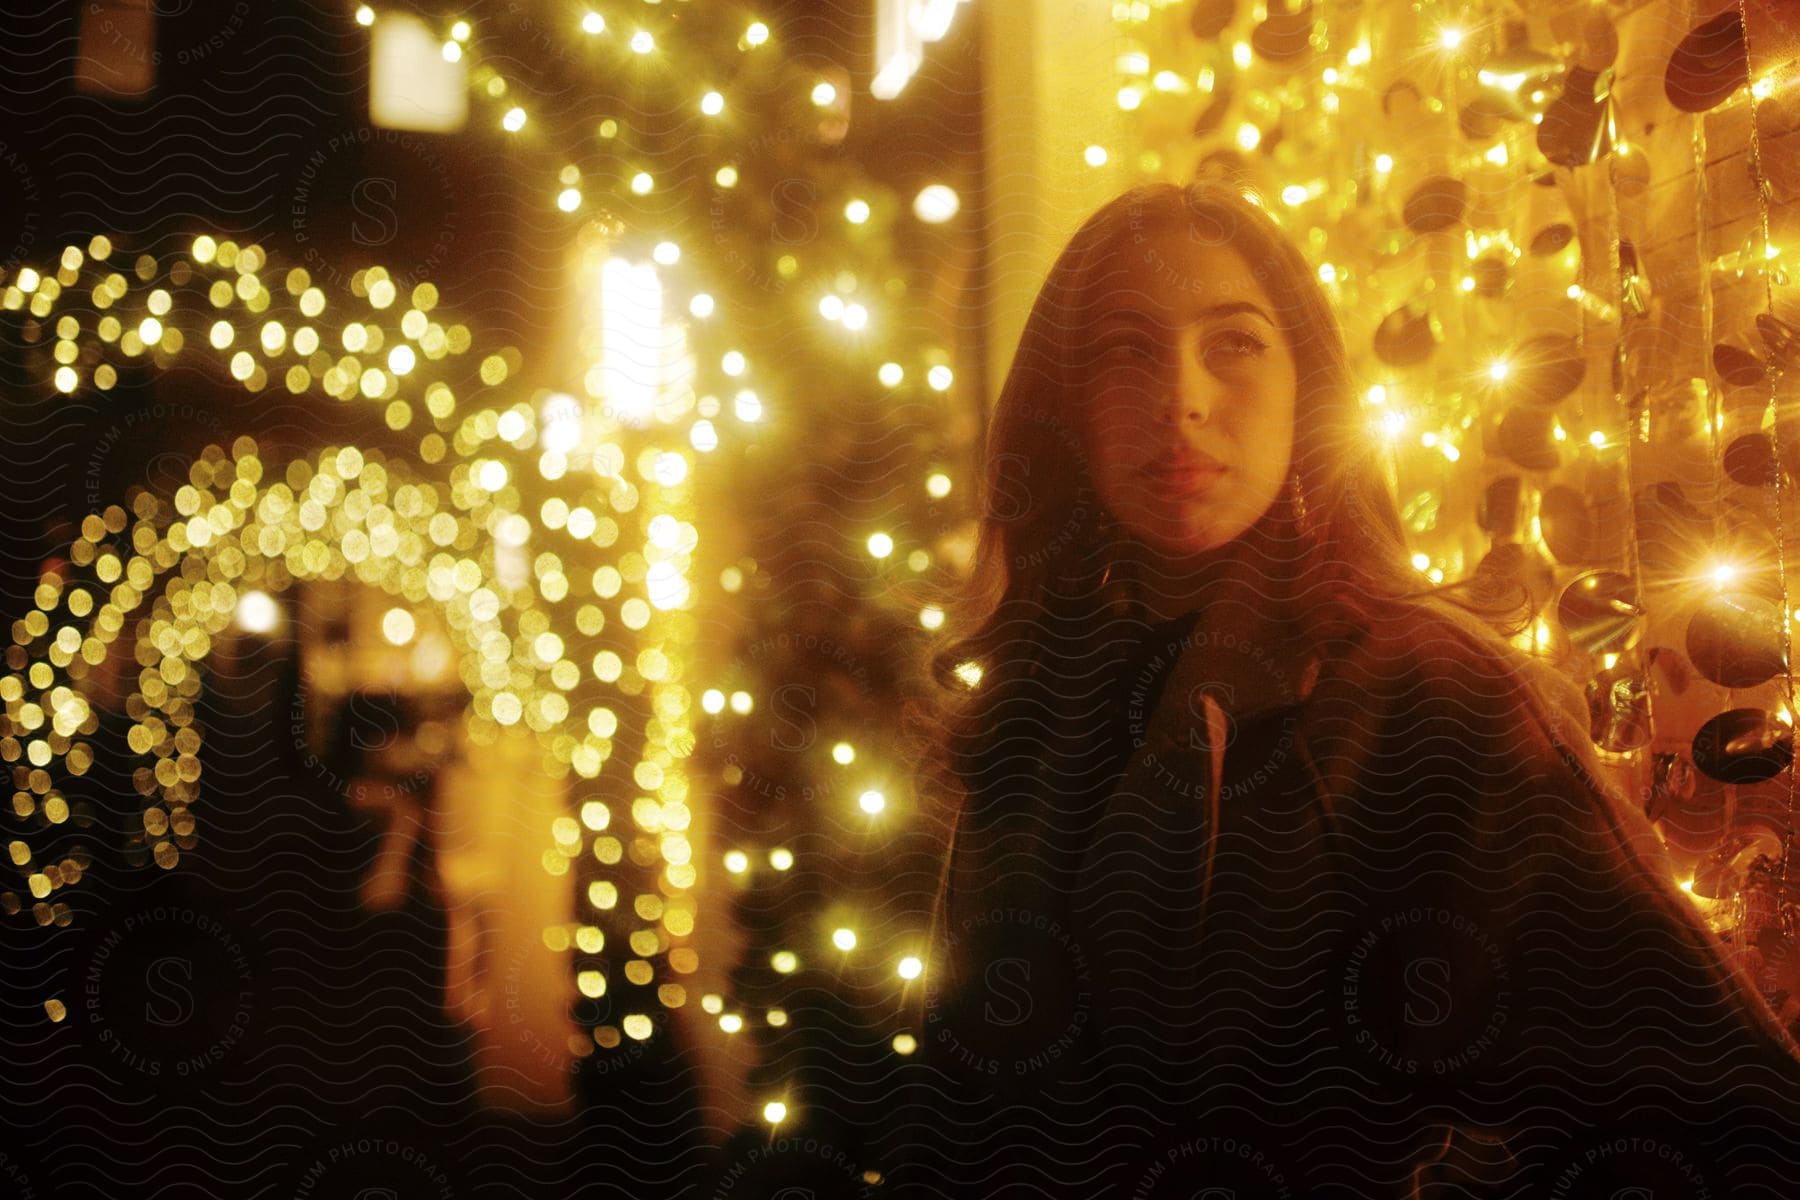 A woman walking at night on a street decorated with christmas lights.